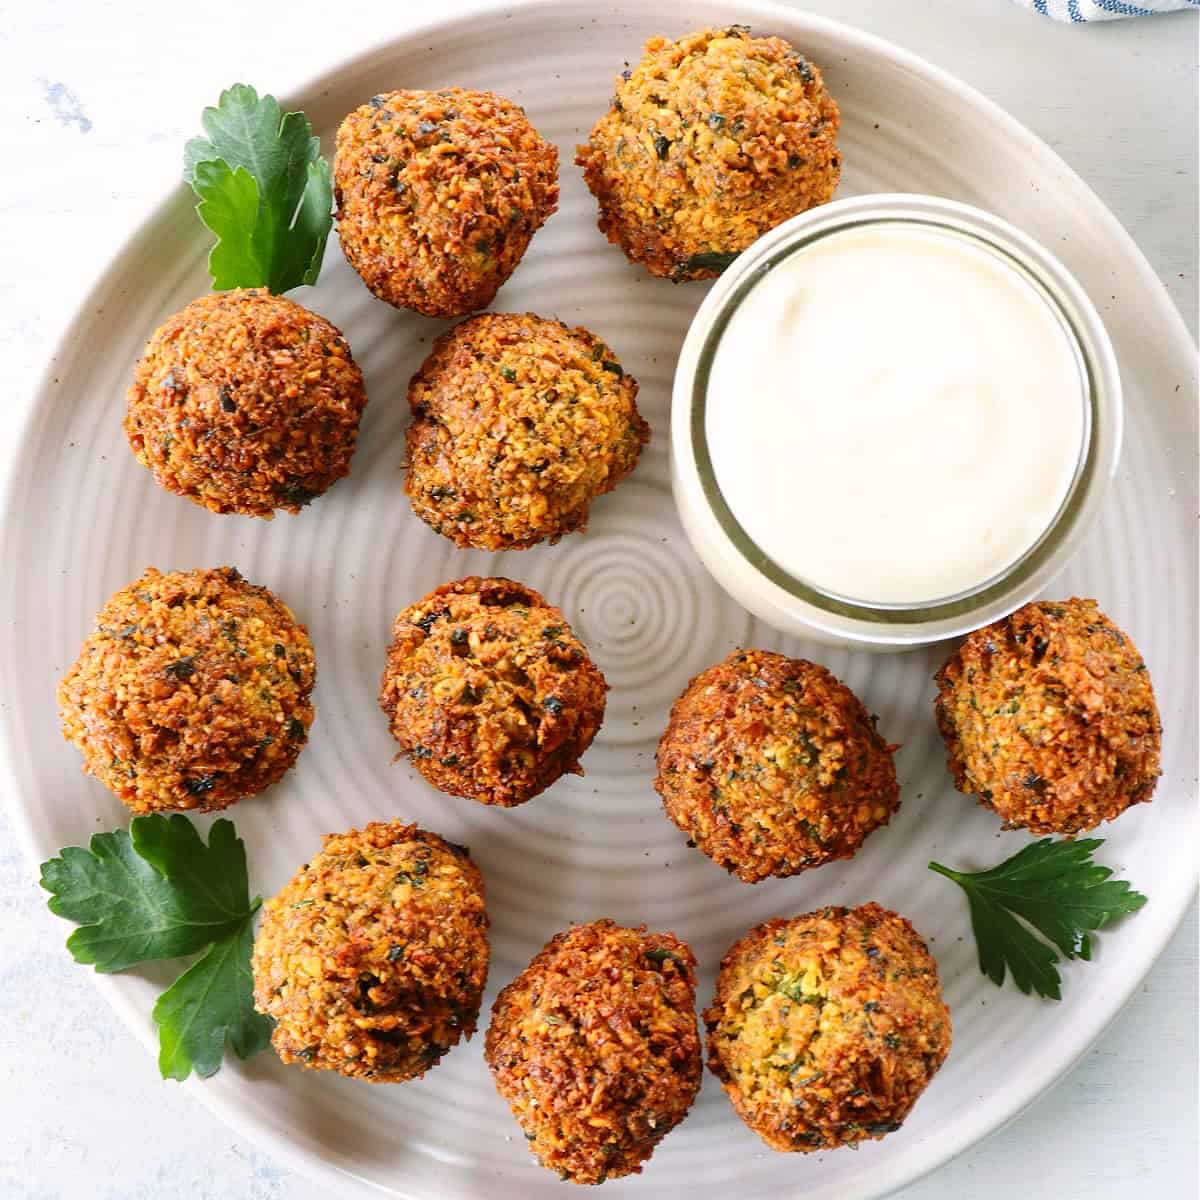 Falafel with sauce on a plate.